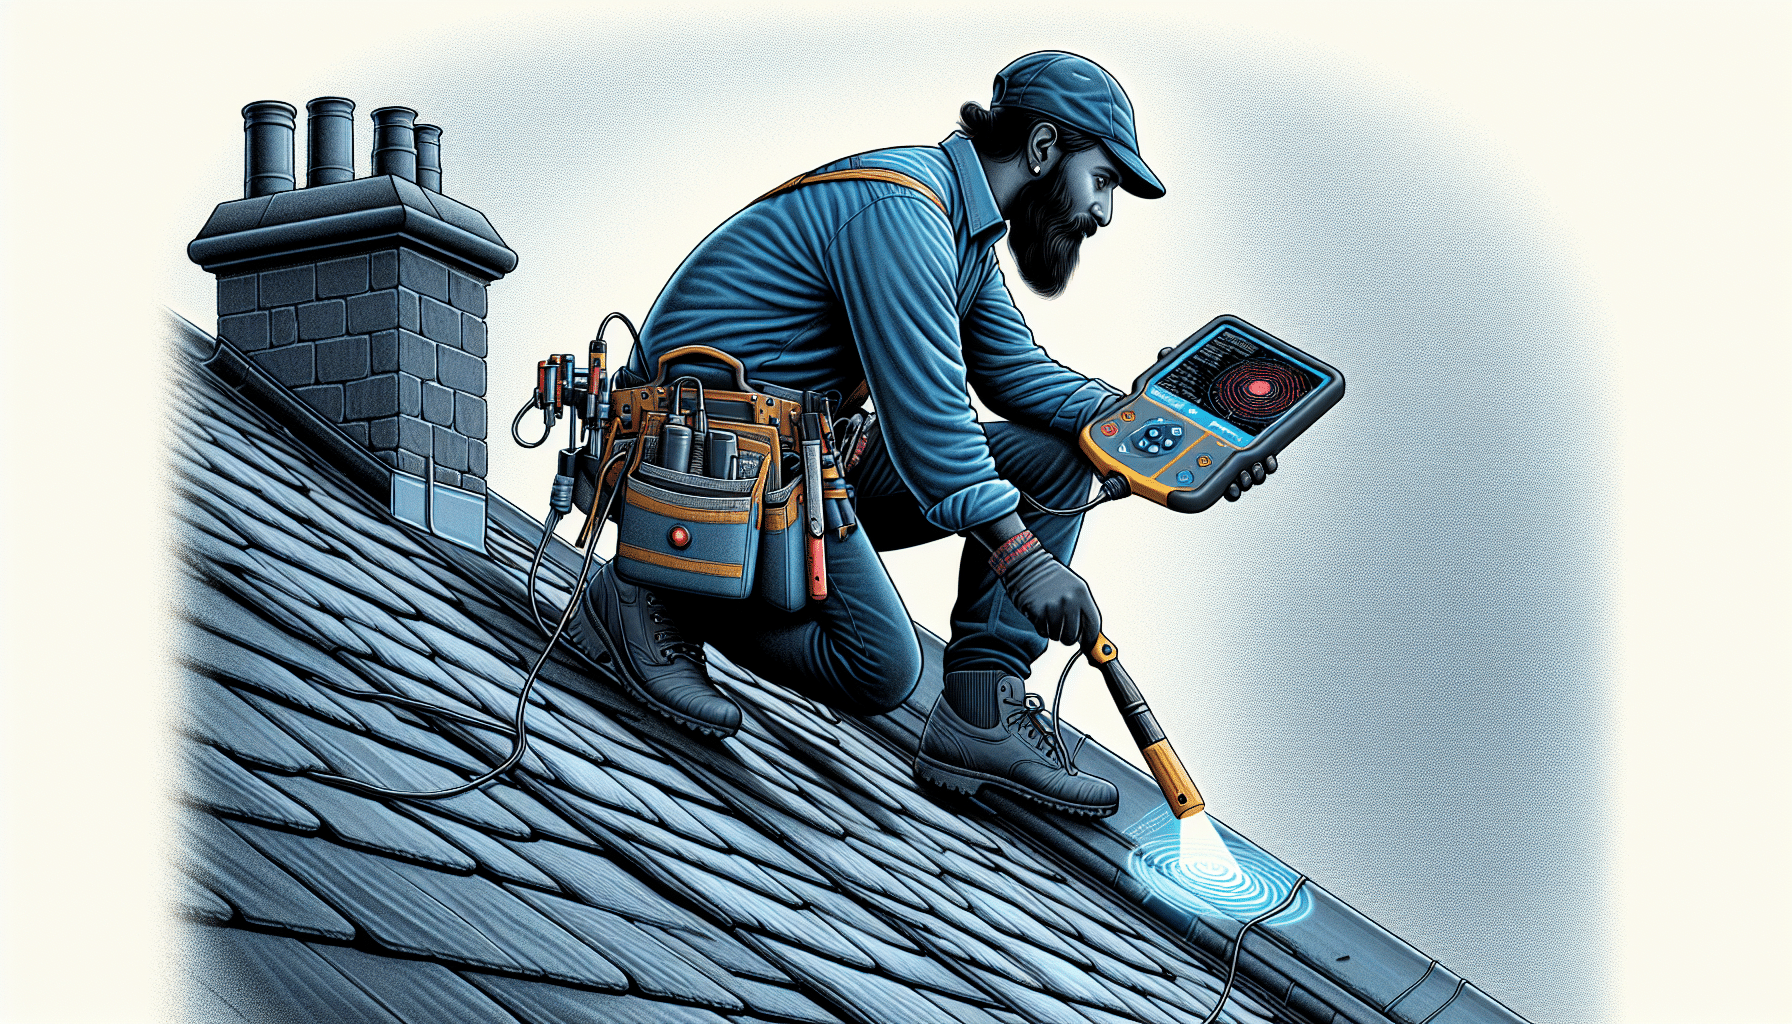 Illustration of a roofer using specialized equipment to detect and repair roof leaks